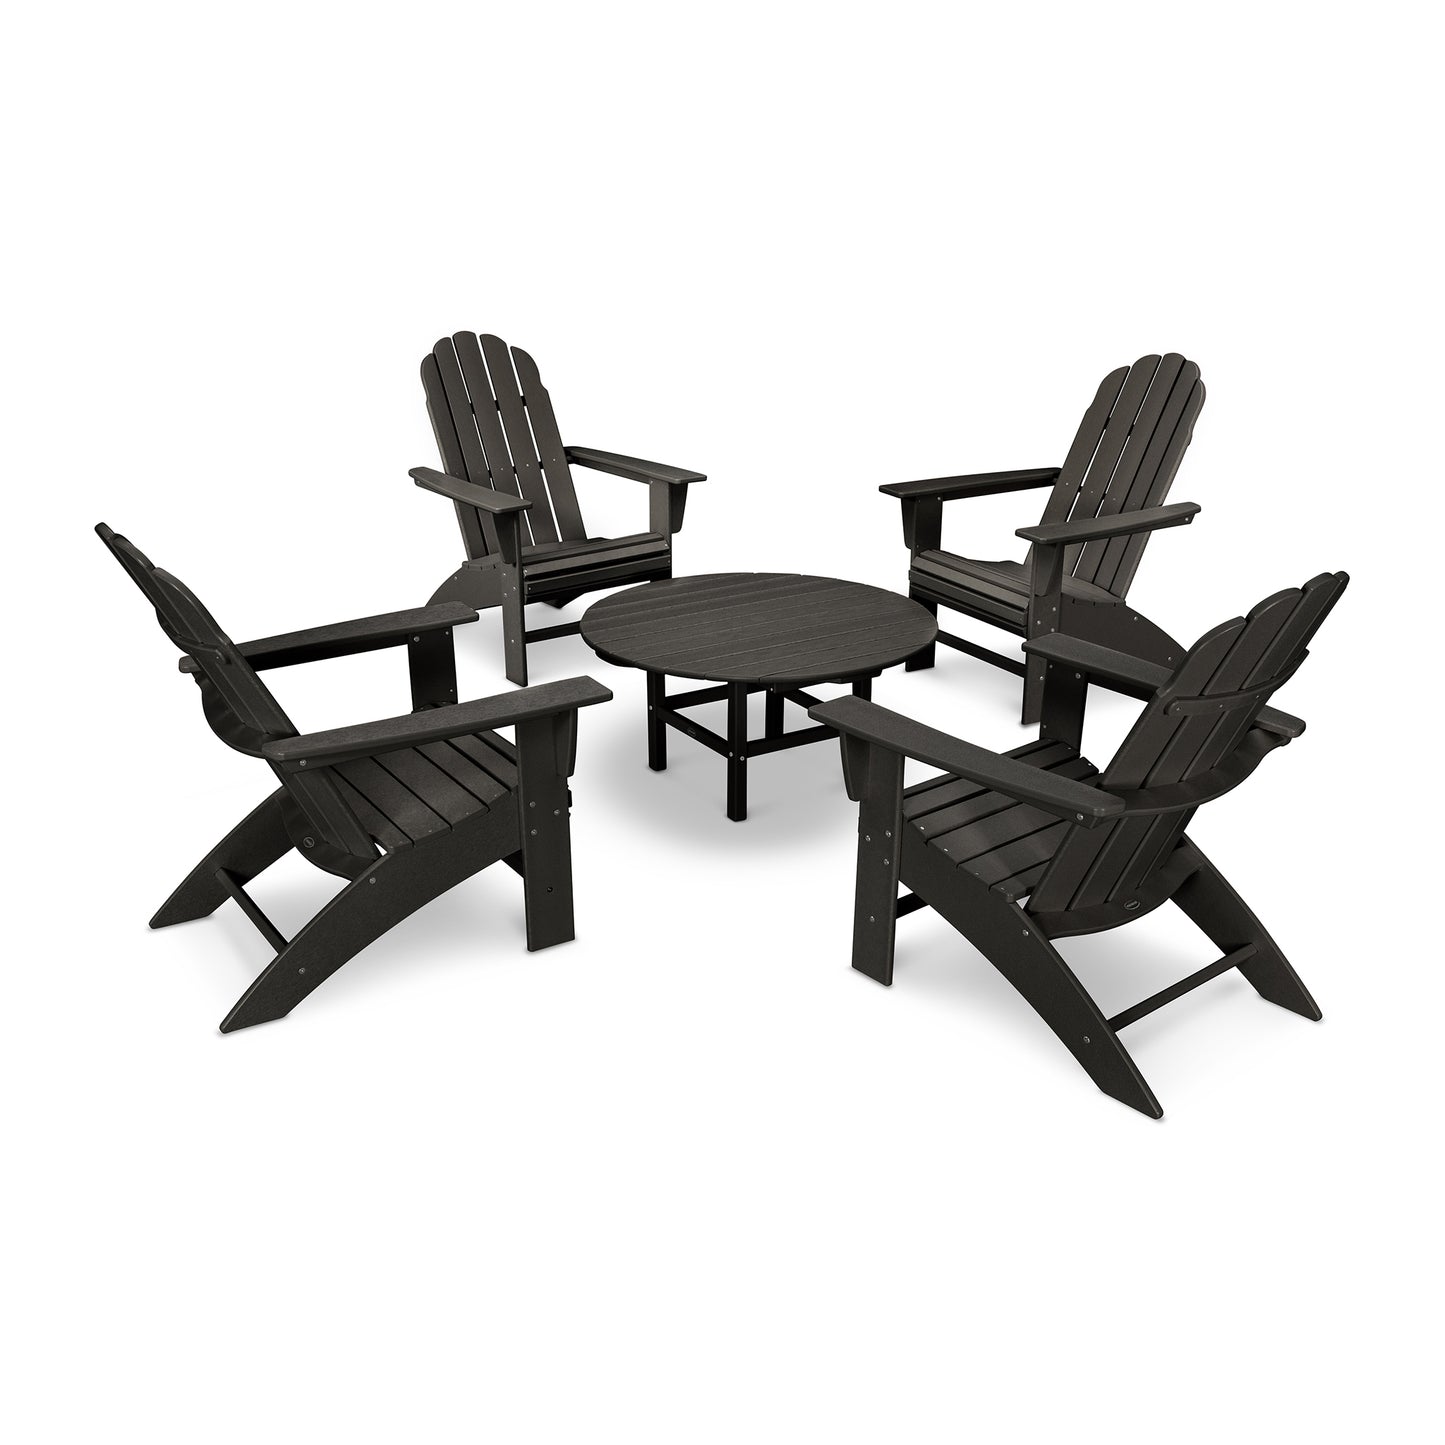 Four POLYWOOD Vineyard Adirondack chairs arranged around a round outdoor table, all crafted from dark brown POLYWOOD lumber, displayed on a white background.